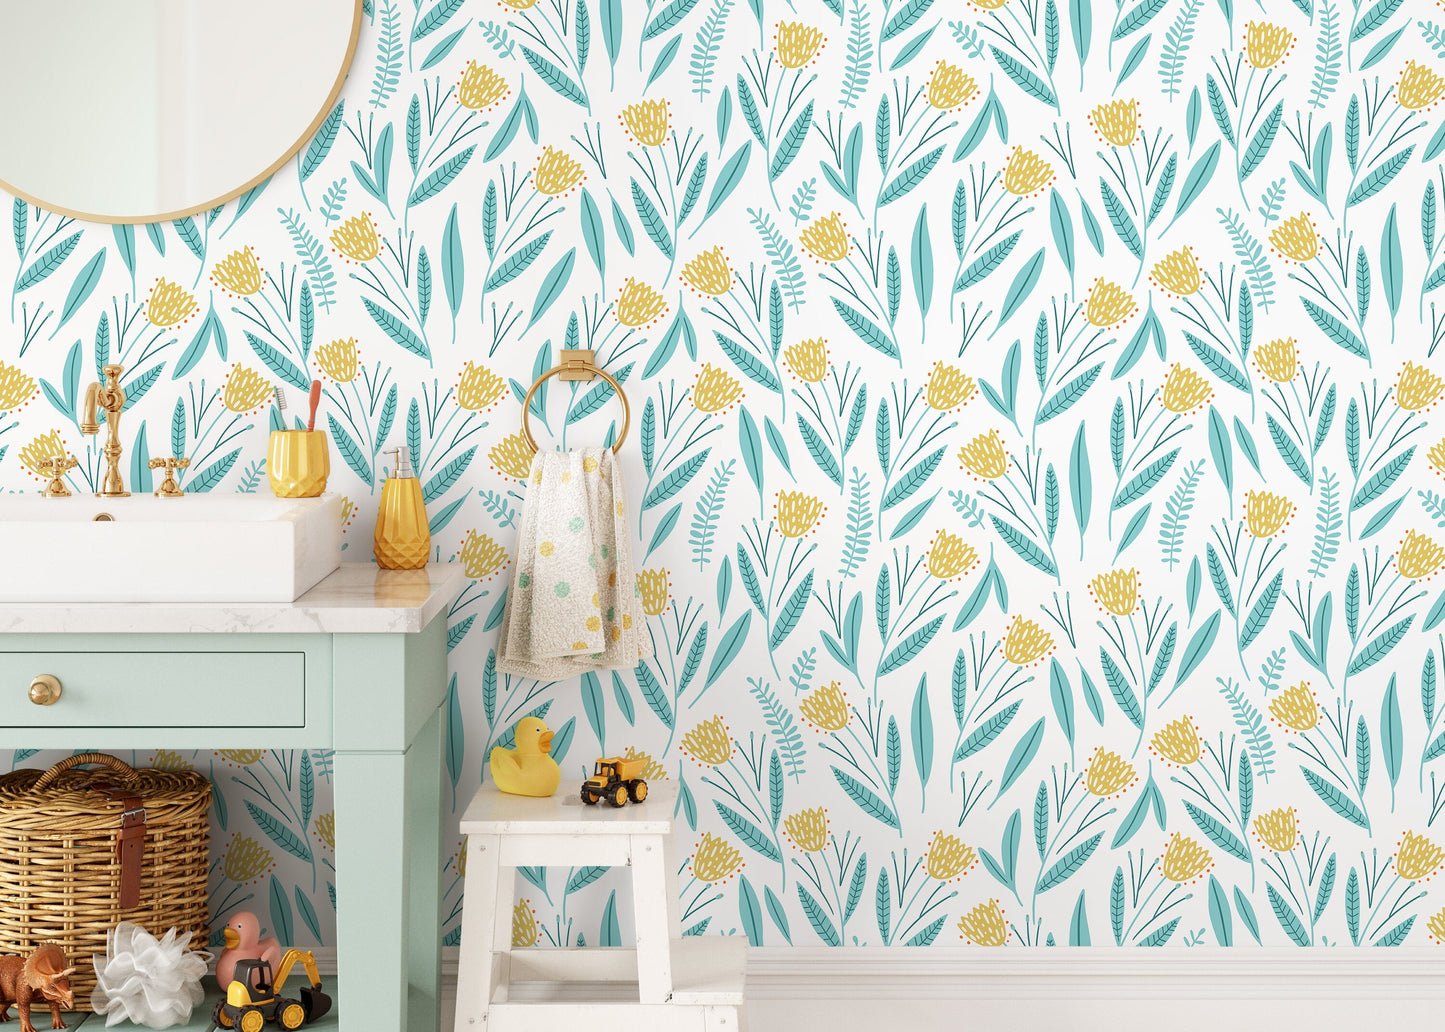 Light Blue and Yellow Floral Wallpaper / Peel and Stick Wallpaper Removable Wallpaper Home Decor Wall Art Wall Decor Room Decor - D389